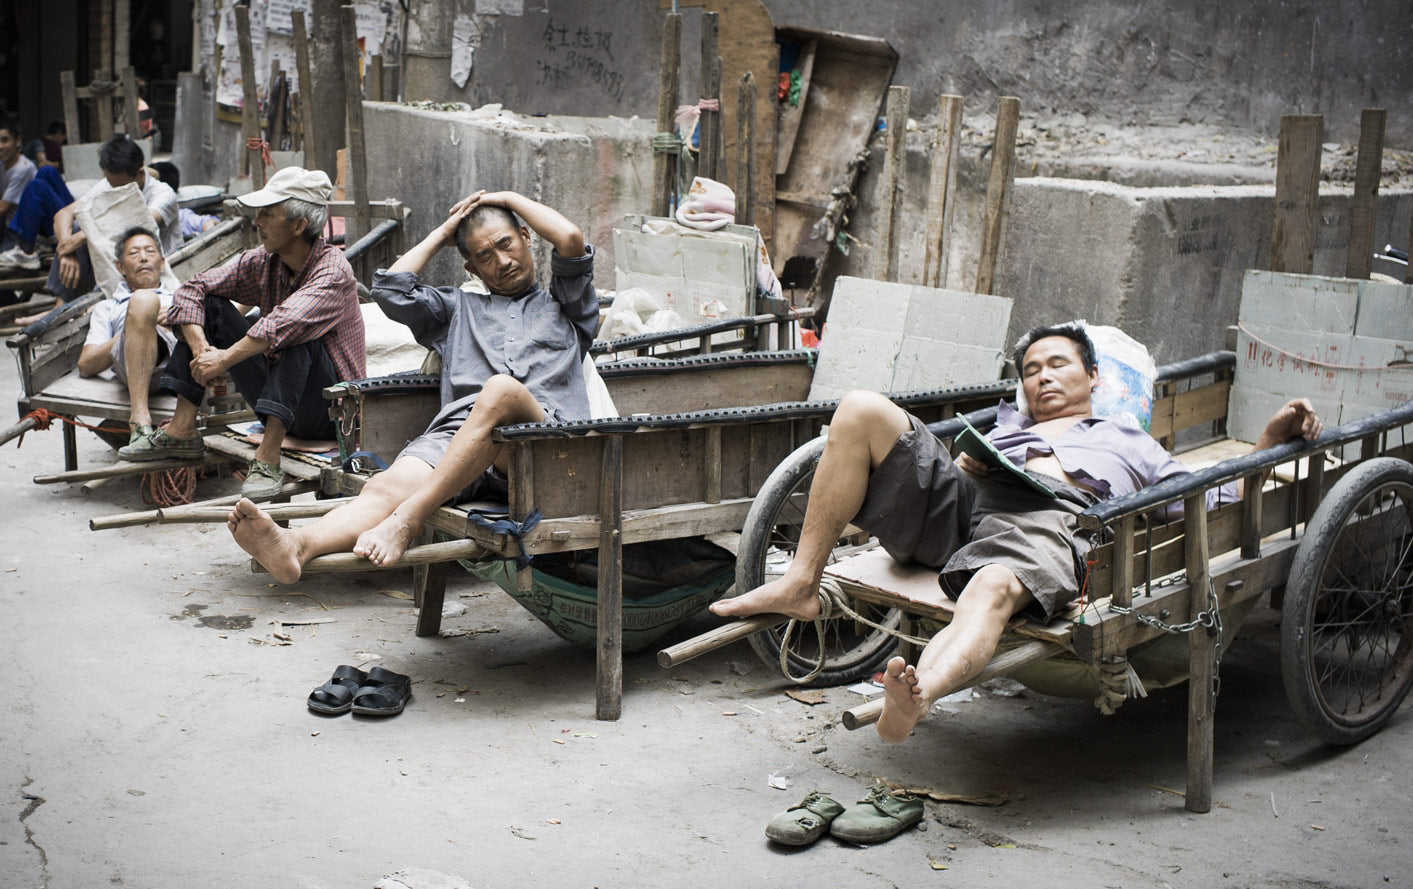 Exhausted porters enjoying a well-deserved break